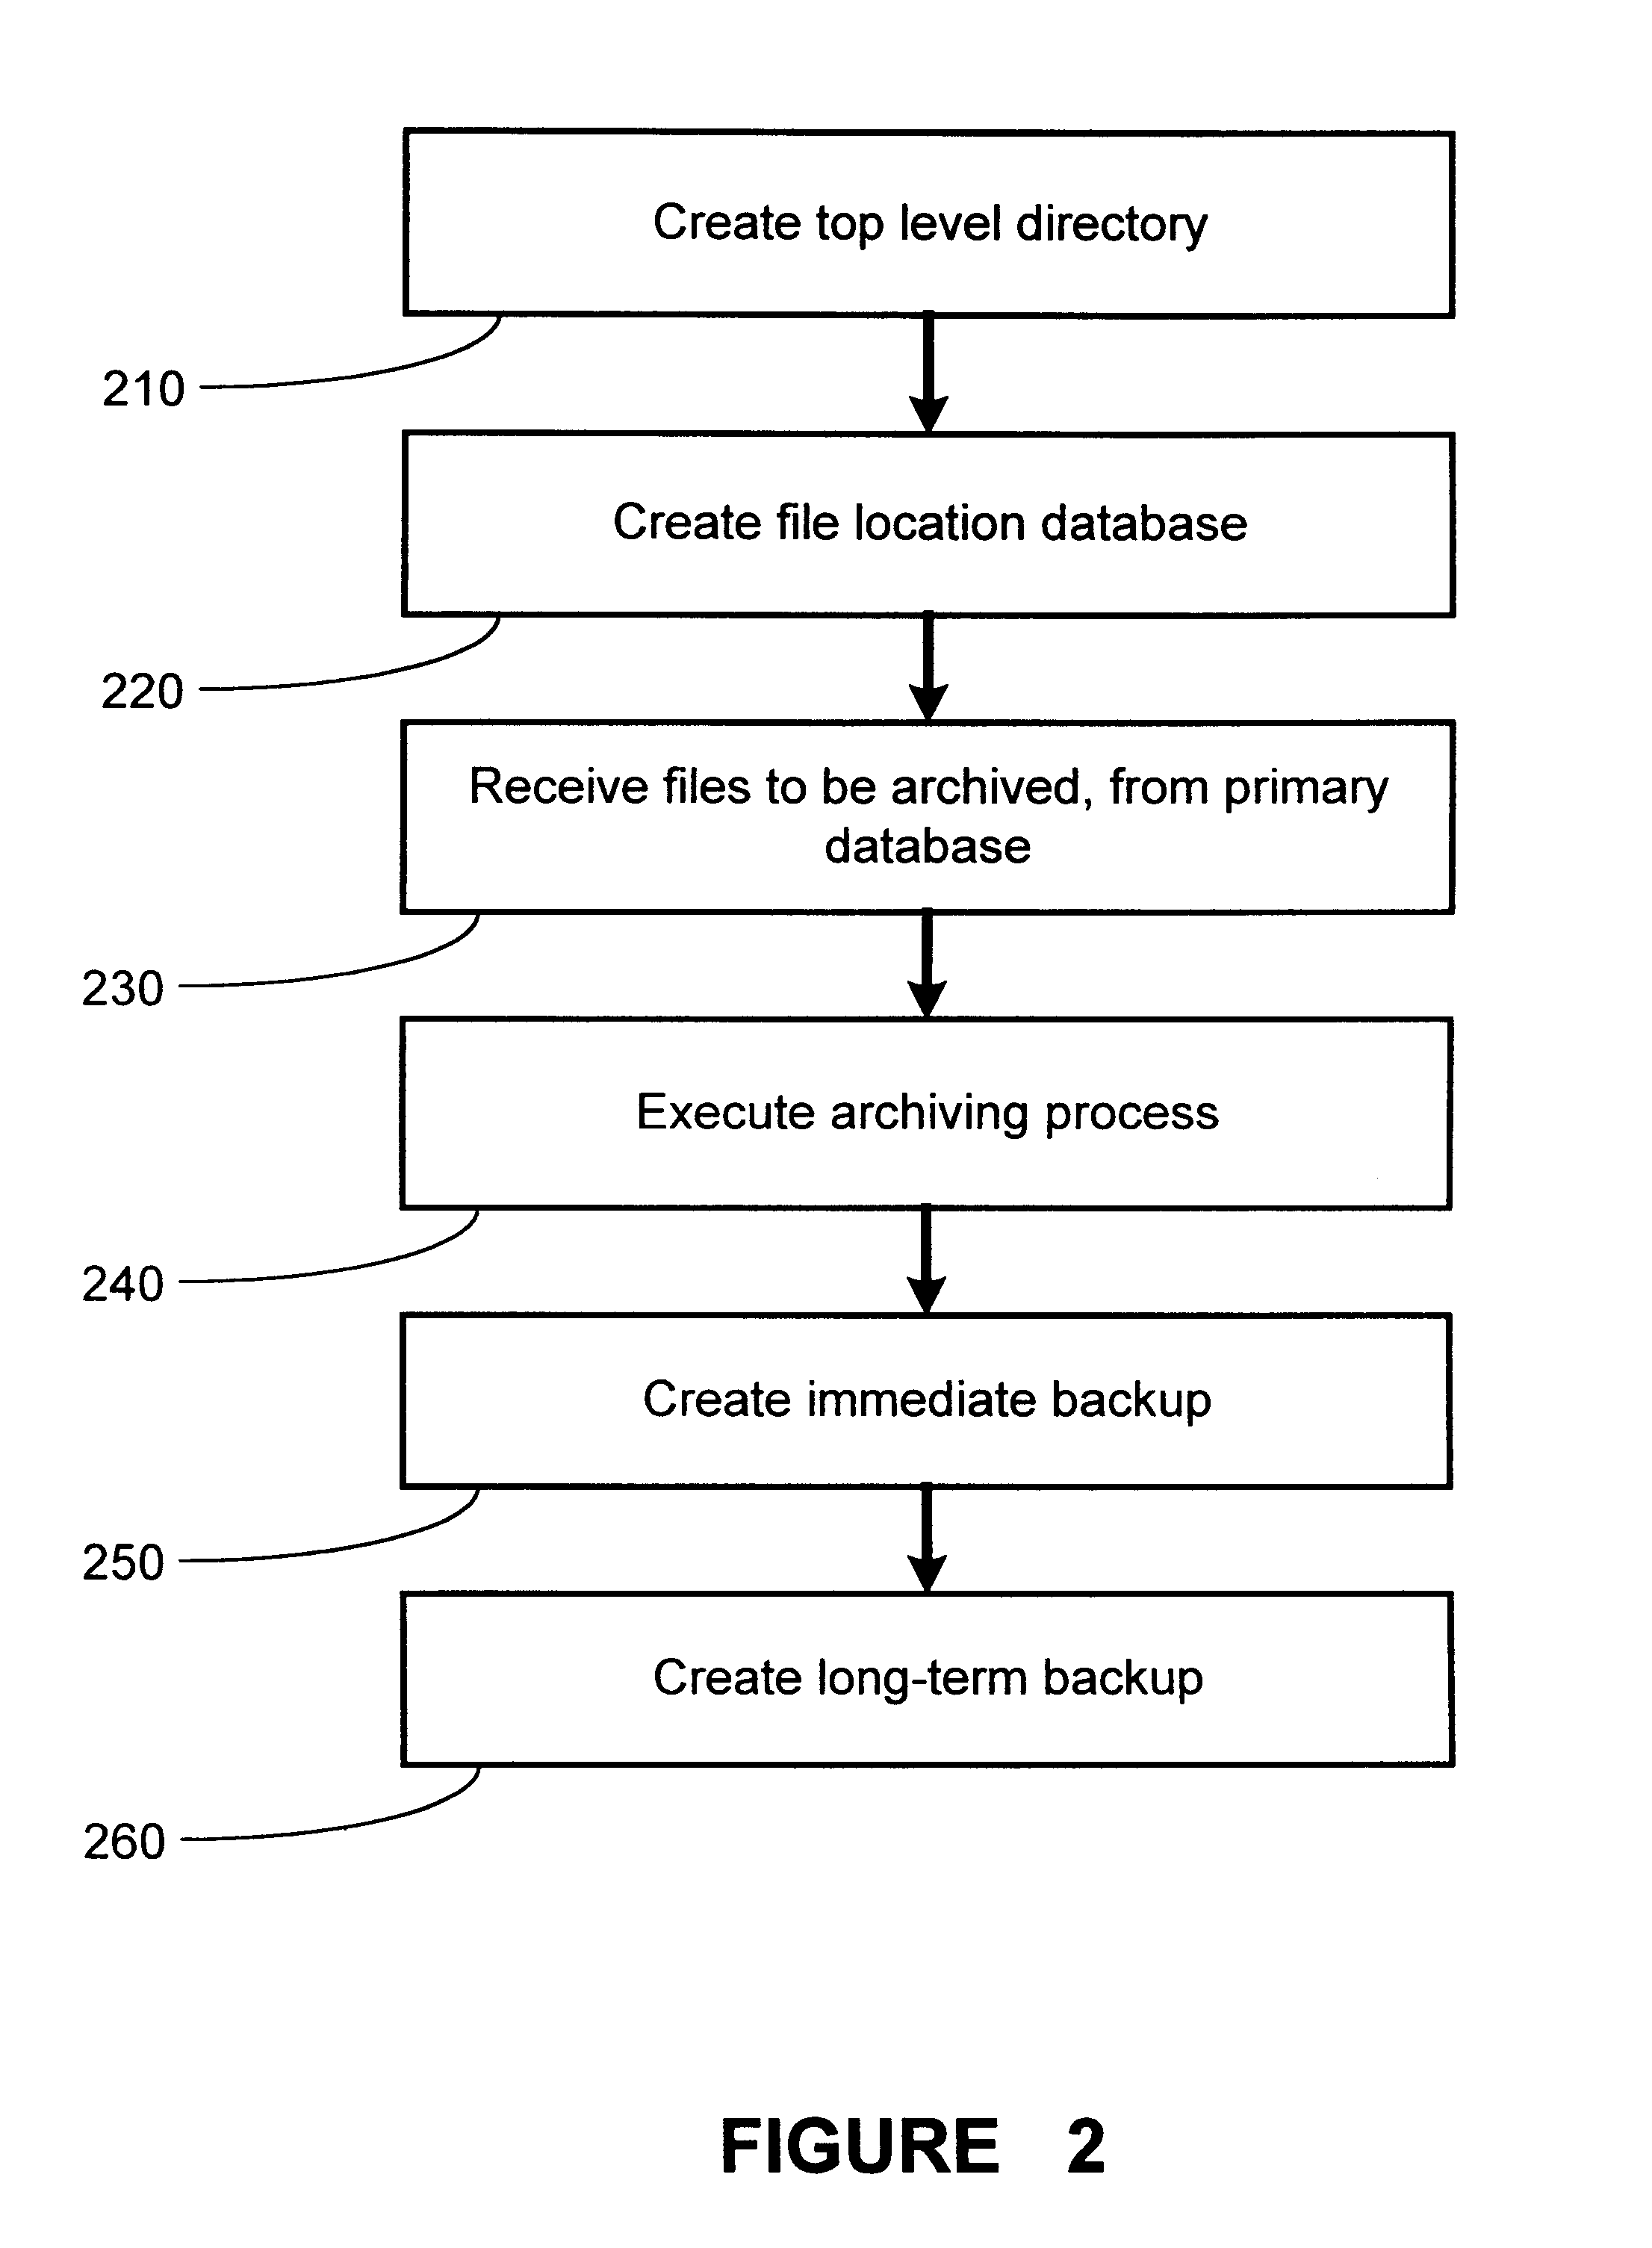 Method and apparatus for hierarchical storage of data for efficient archiving and retrieval of data